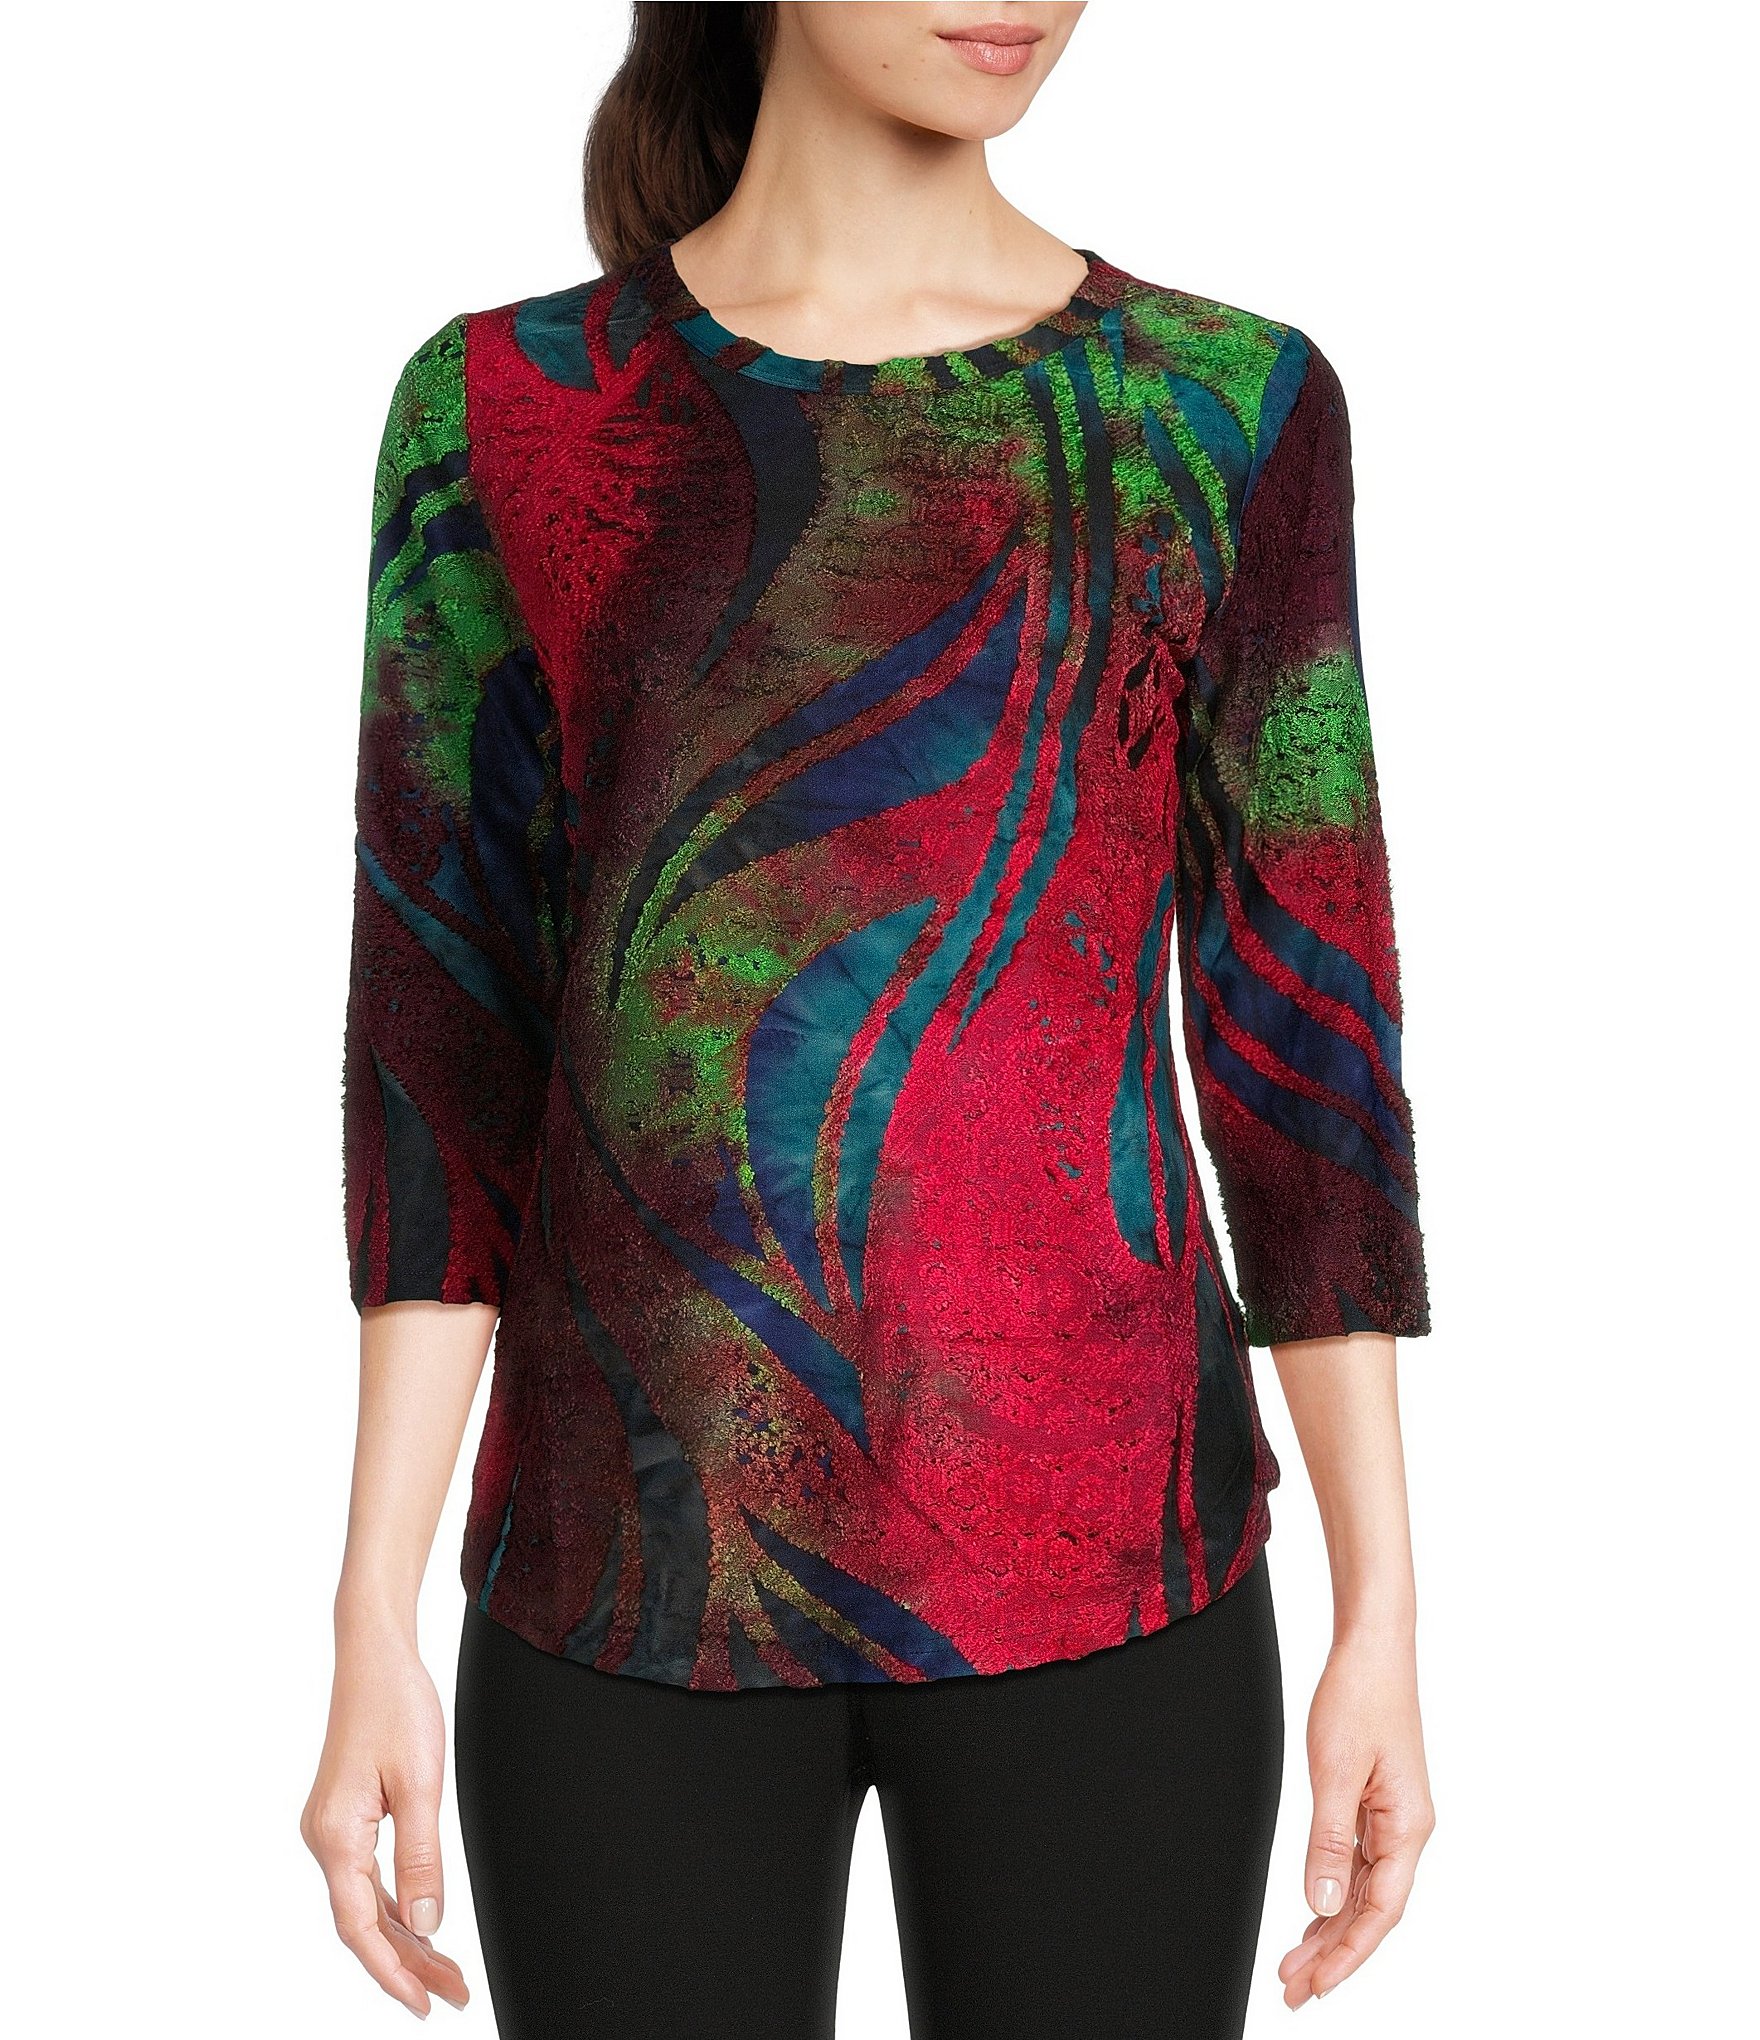 Calessa Jacquard Burnout Knit Crew Neck 3/4 Sleeve Abstract Tie Dye ...